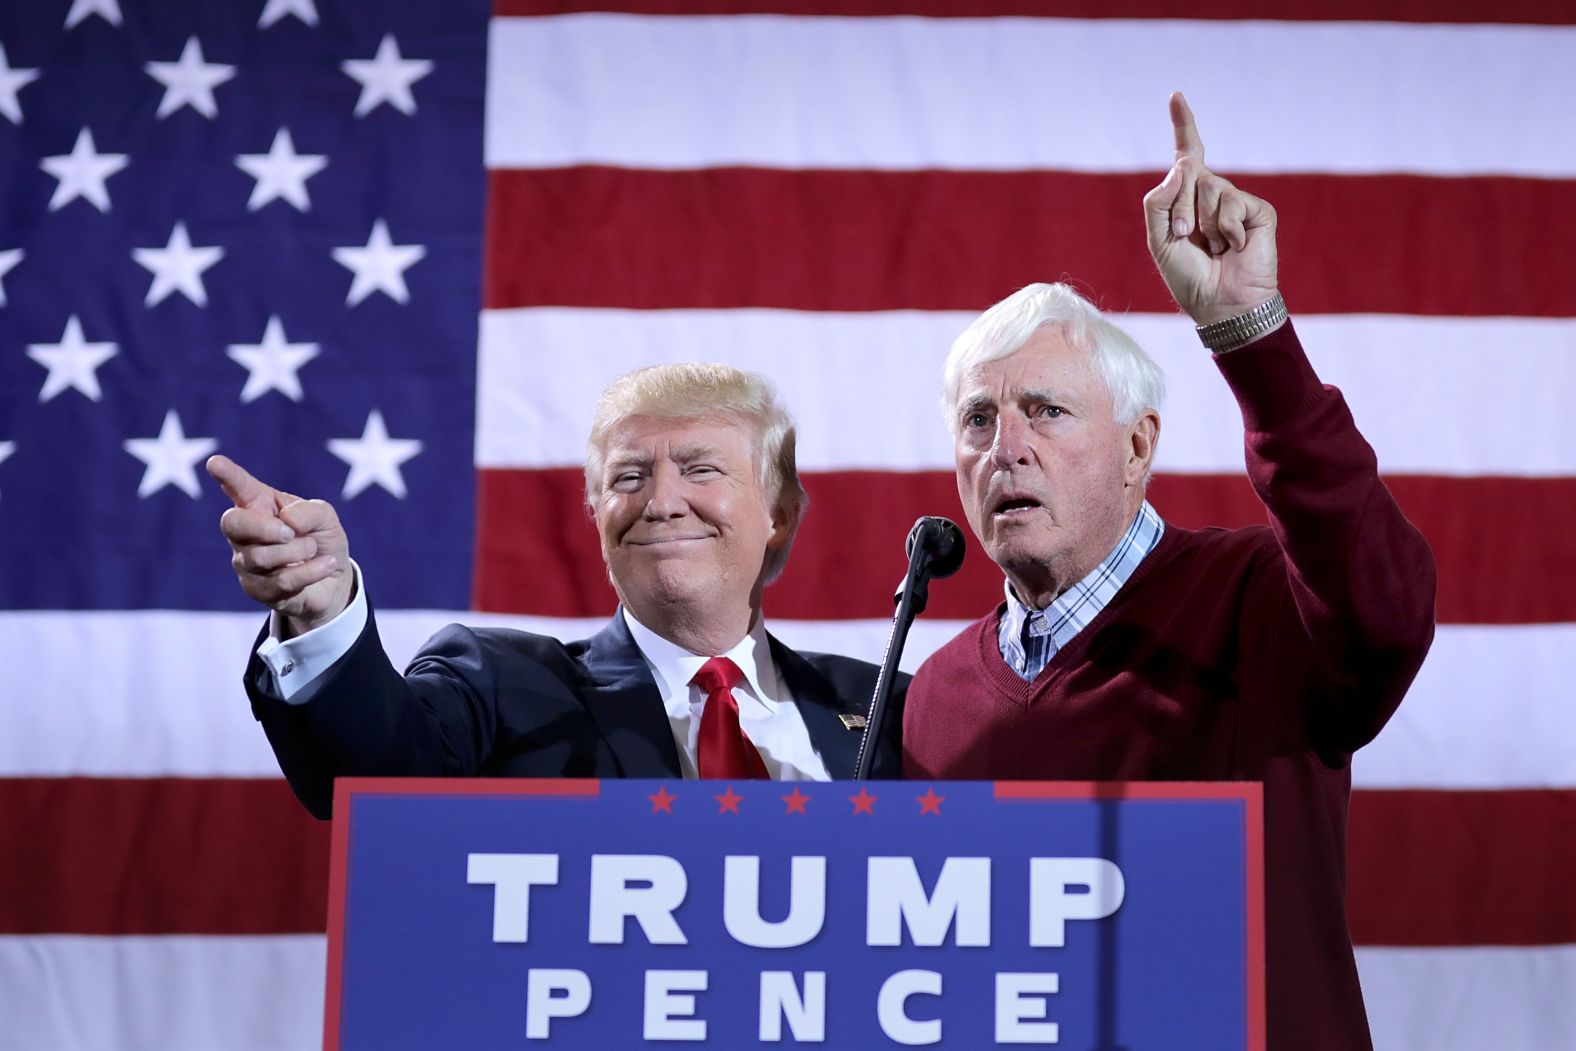 Then-presidential nominee Donald Trump is introduced by Knight during a campaign rally in 2016.